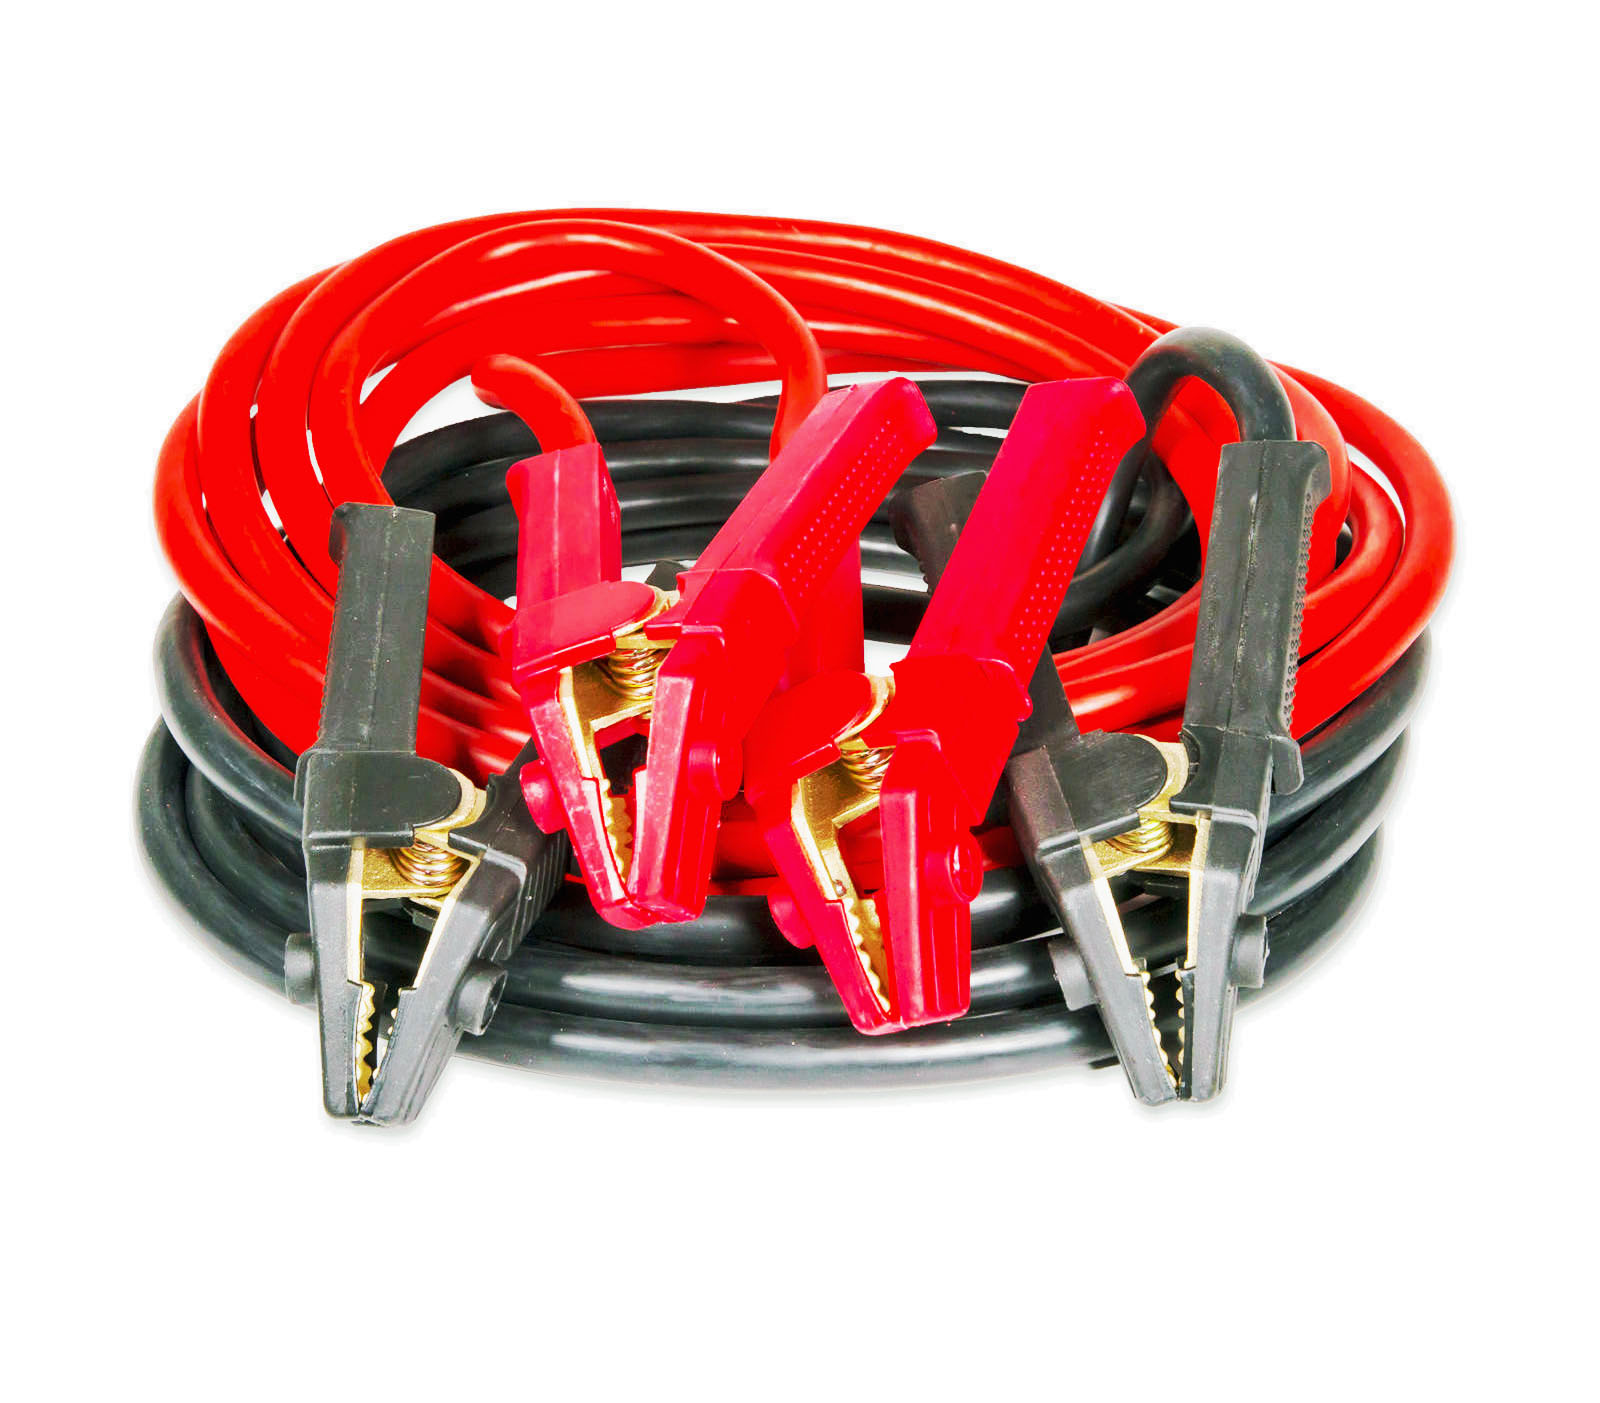 ▷ Jumper cable - Outdoor available Land 1200A | 4x4-Equipment here! 6m & Nakatanenga Rover, max. Offroad for length